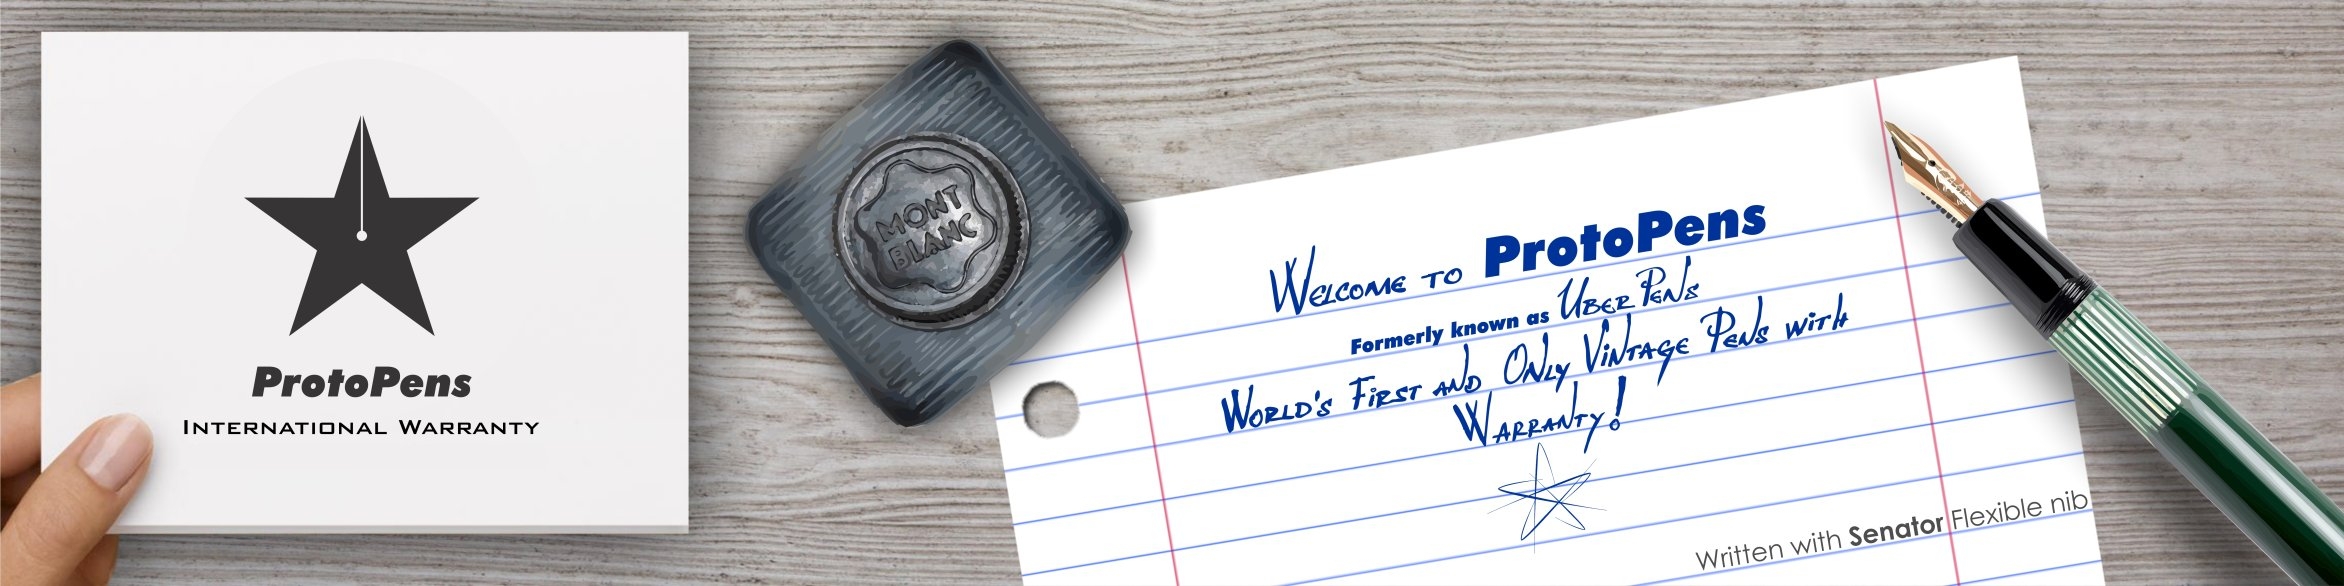 Welcome to UberPens. World's first and only vintage pens with warranty